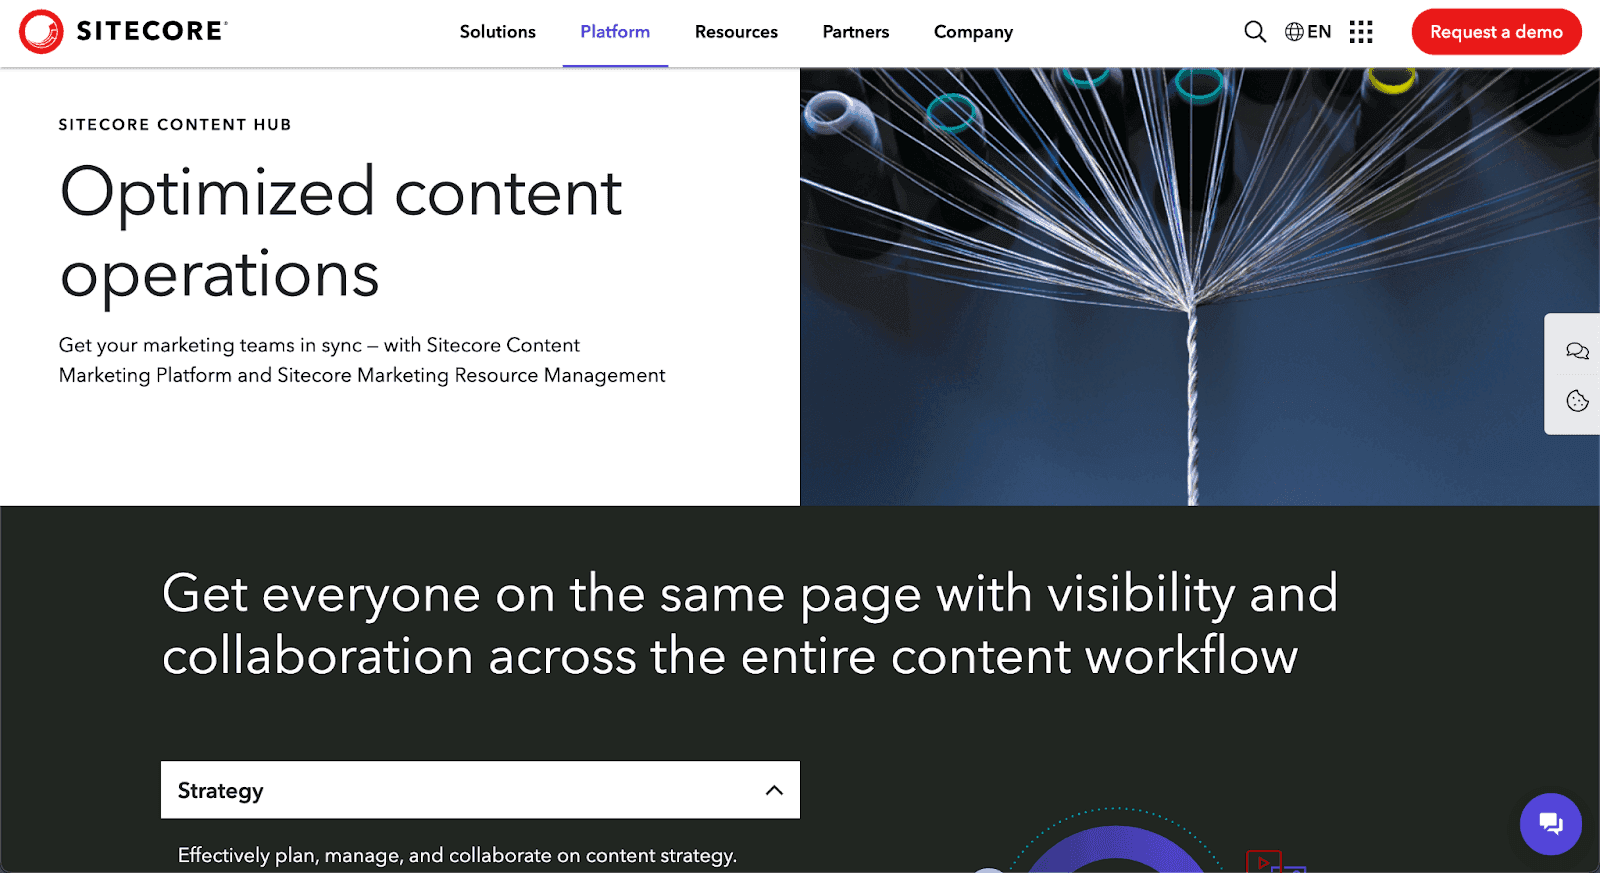 Sitcore Content hub can be used for all your content needs.